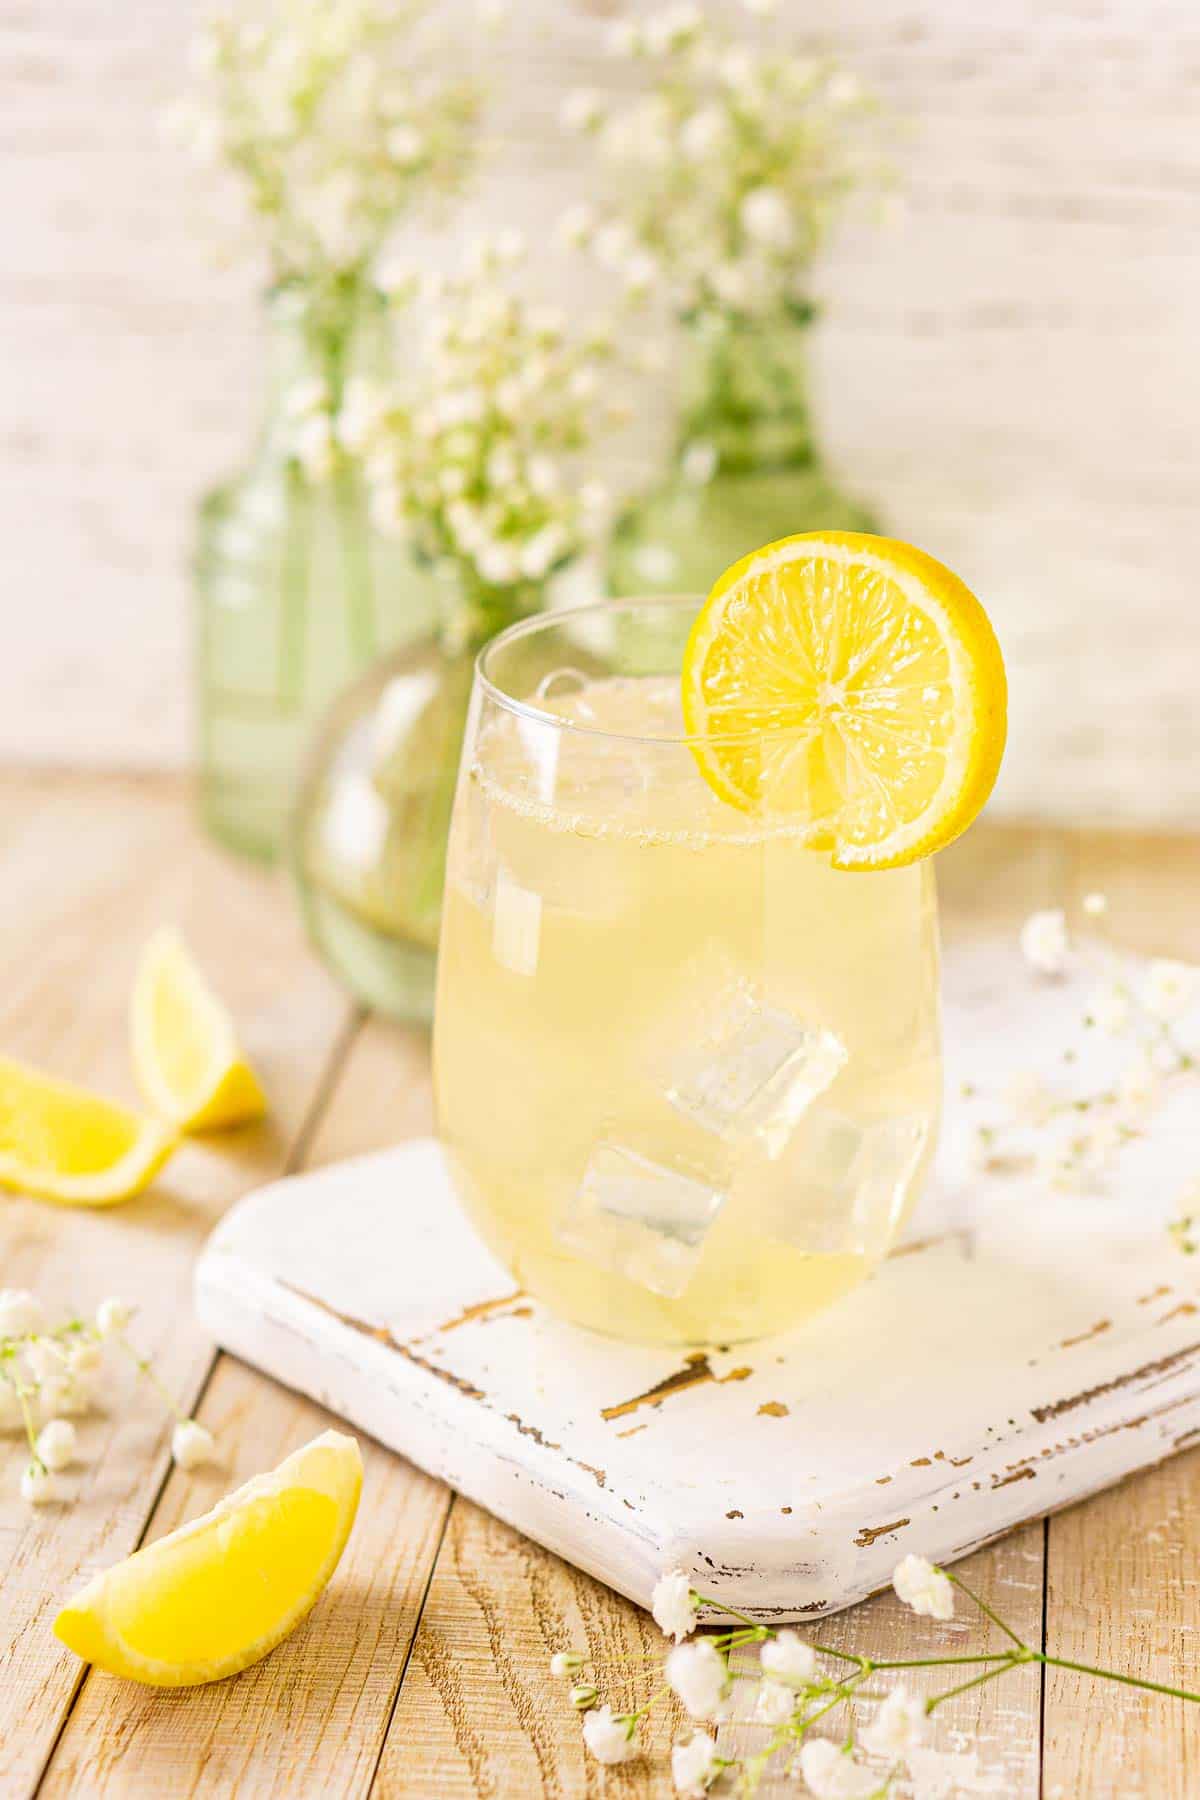 A side view of the St. Germain elderflower spritz on a white serving tray with flowers and lemon slices to the left.